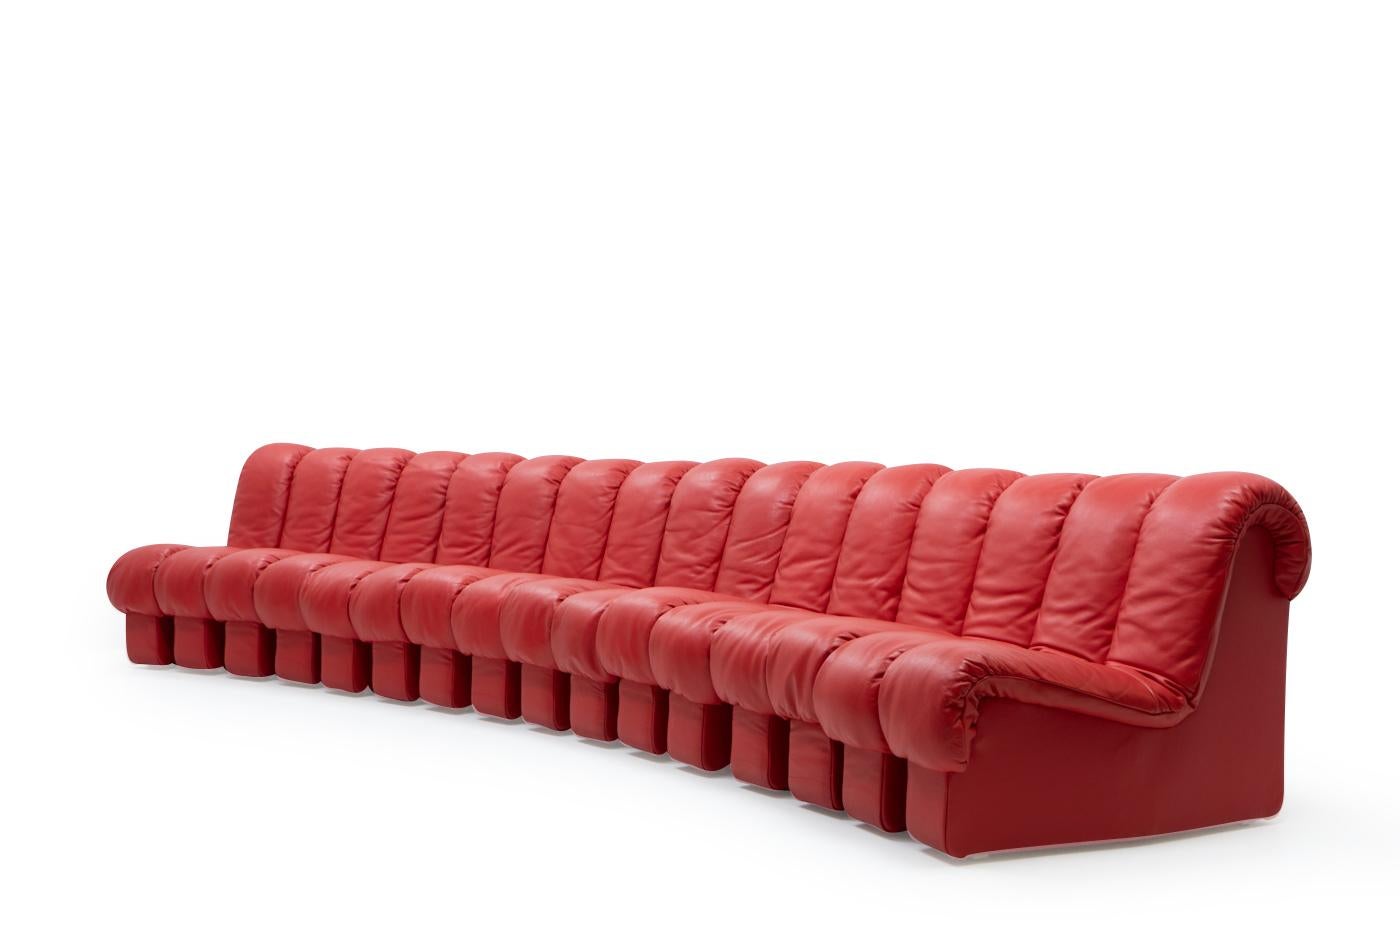 De Sede DS-600 “Non-Stop” or “Tatzelworm” modular sofa model in red leather.

This large modular sofa consists of 16 pieces, and was designed by Ueli Berger and Eleonore Peduzzi-Riva, Klaus Vogt and Heinz Ulrich. Considering the condition and color